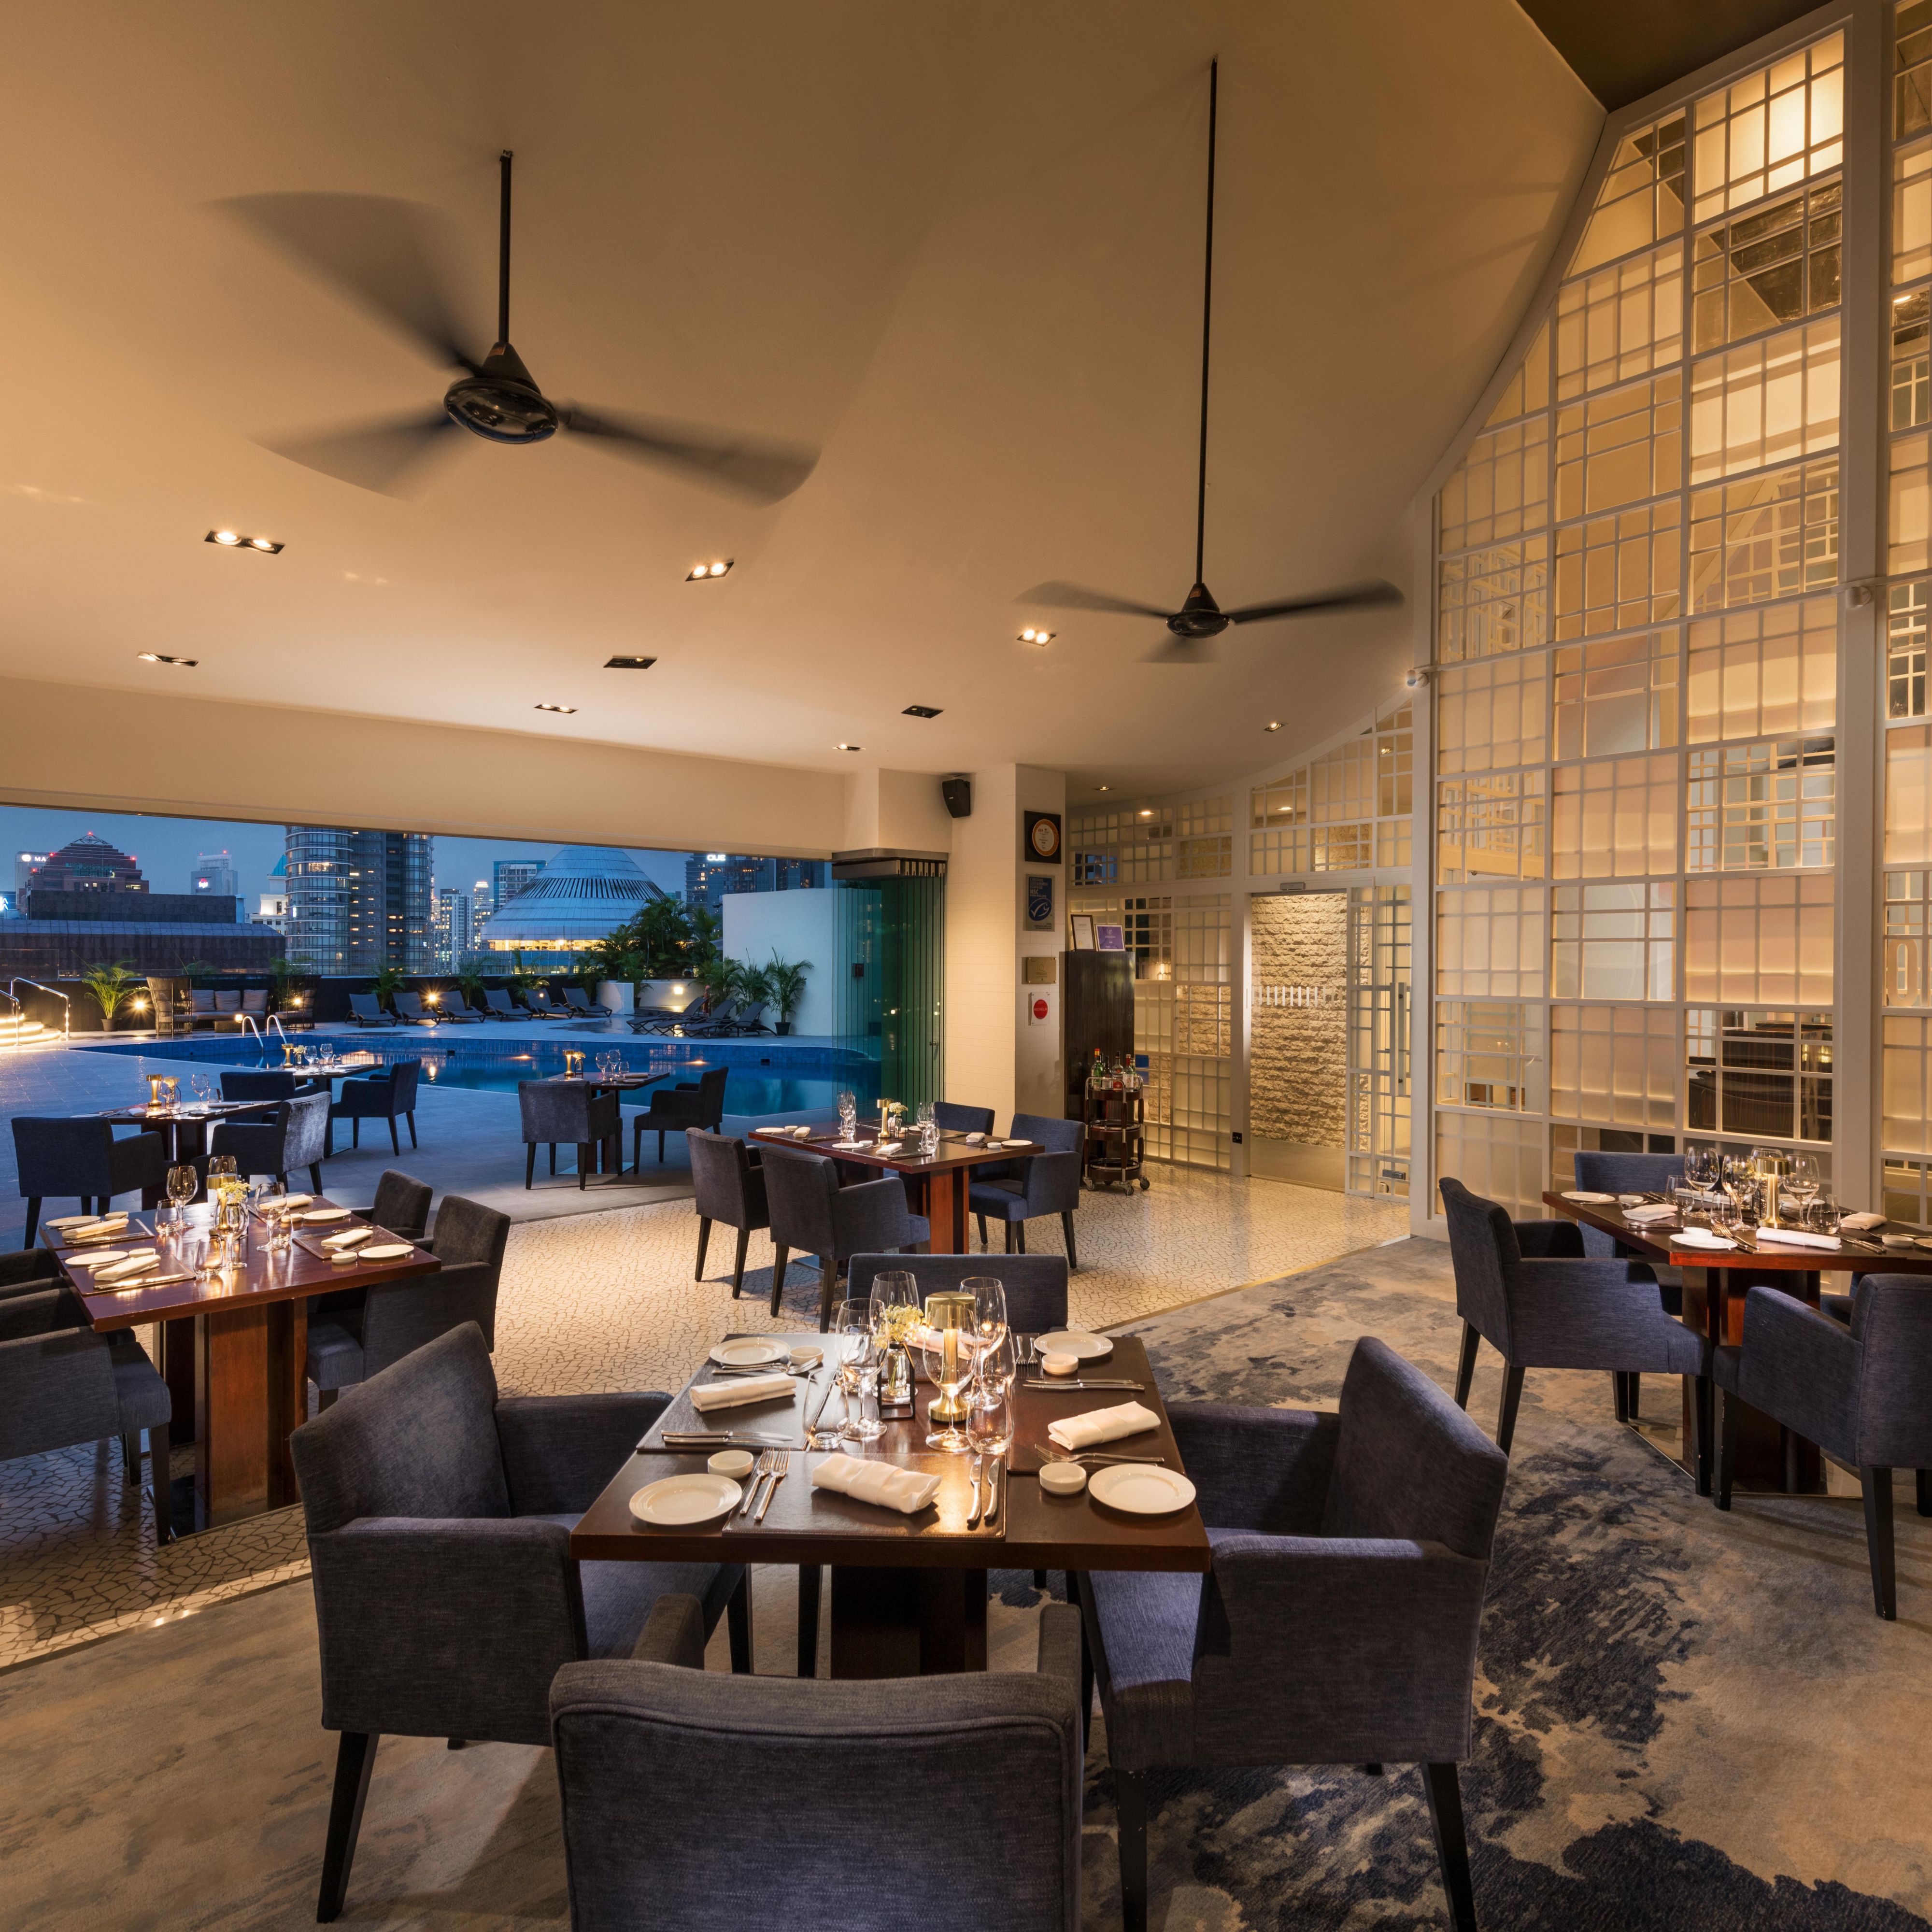 Dine with views of the Orchard Road skyline from il Cielo